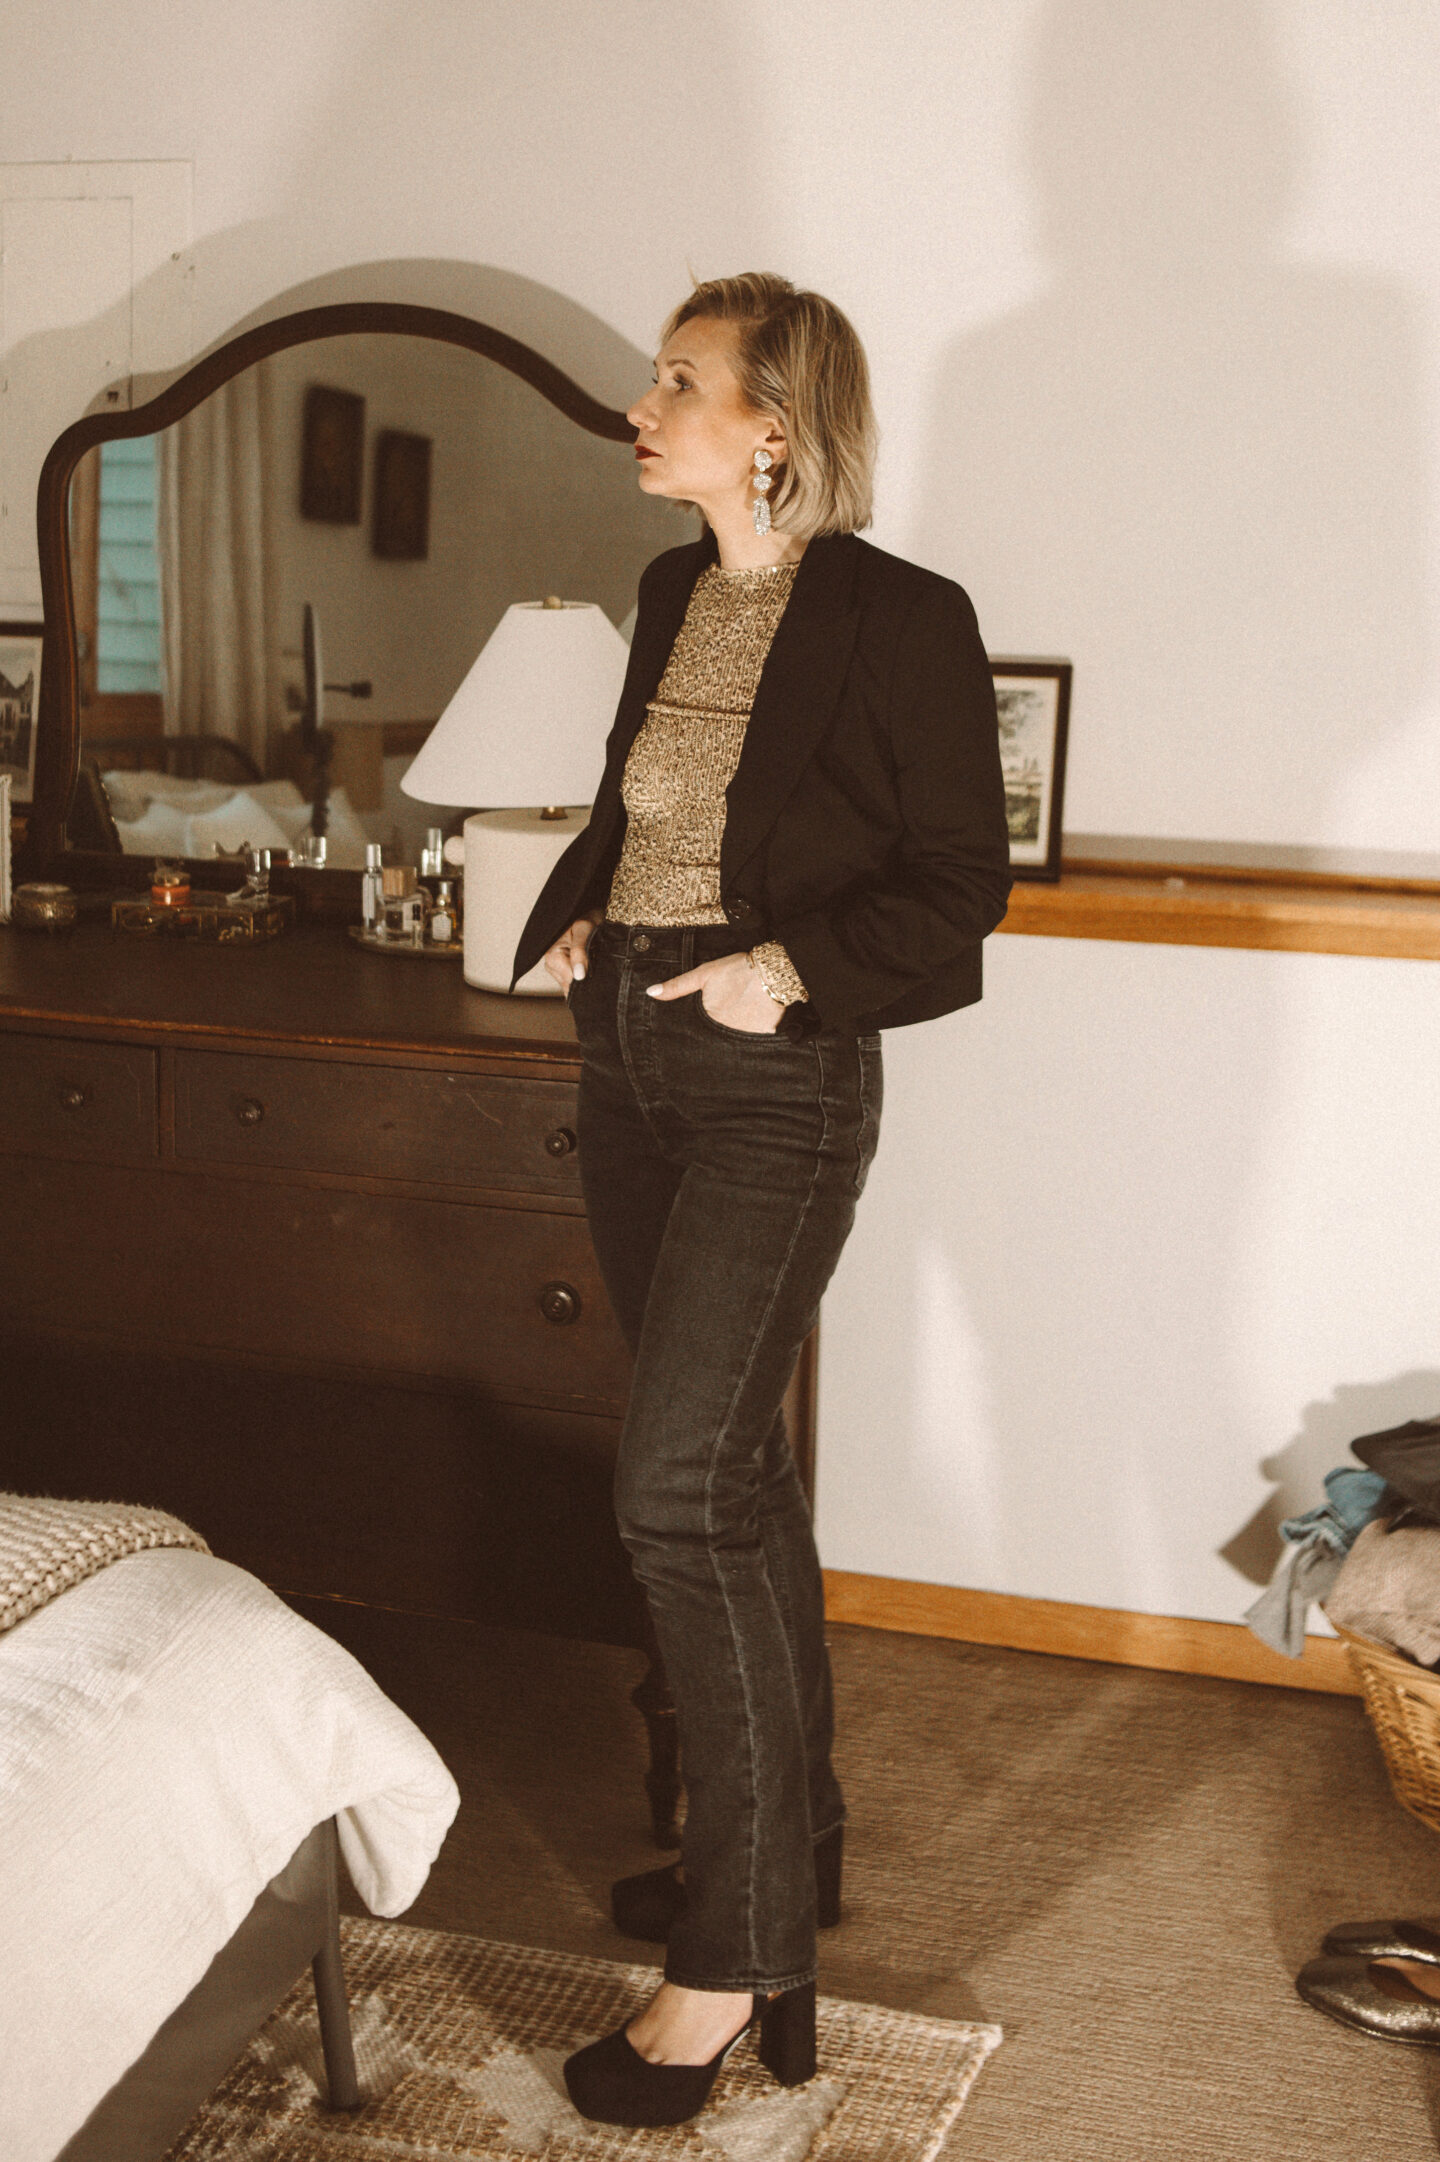 Karin Emily wears a cropped blazer with a sequin top, black agolde jeans, and black platform heels